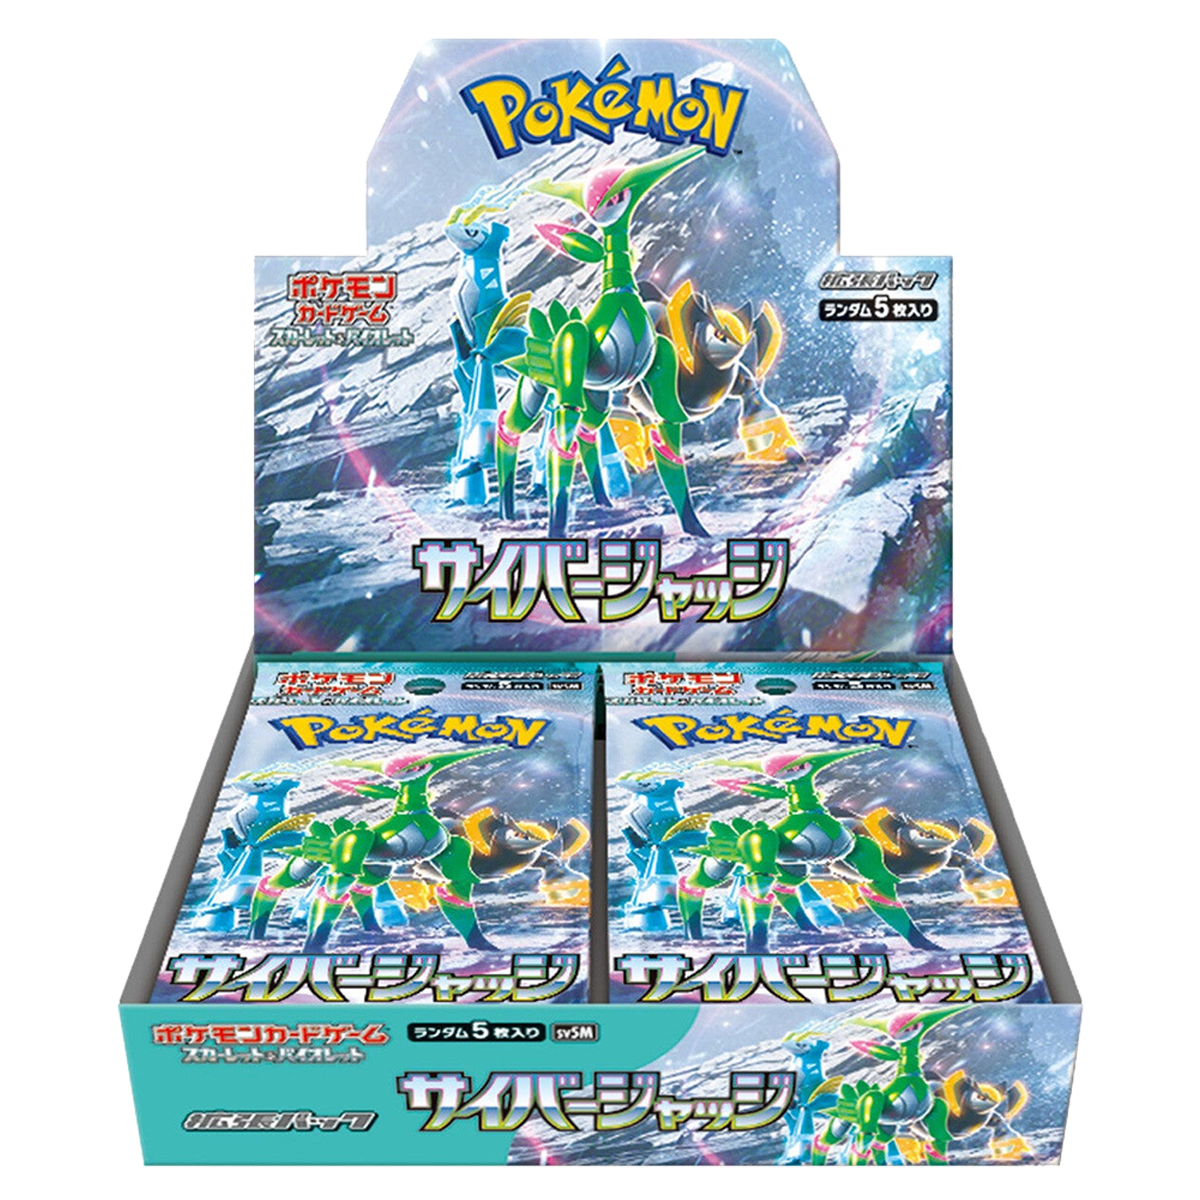 Japanese Cyber Judge Booster Box